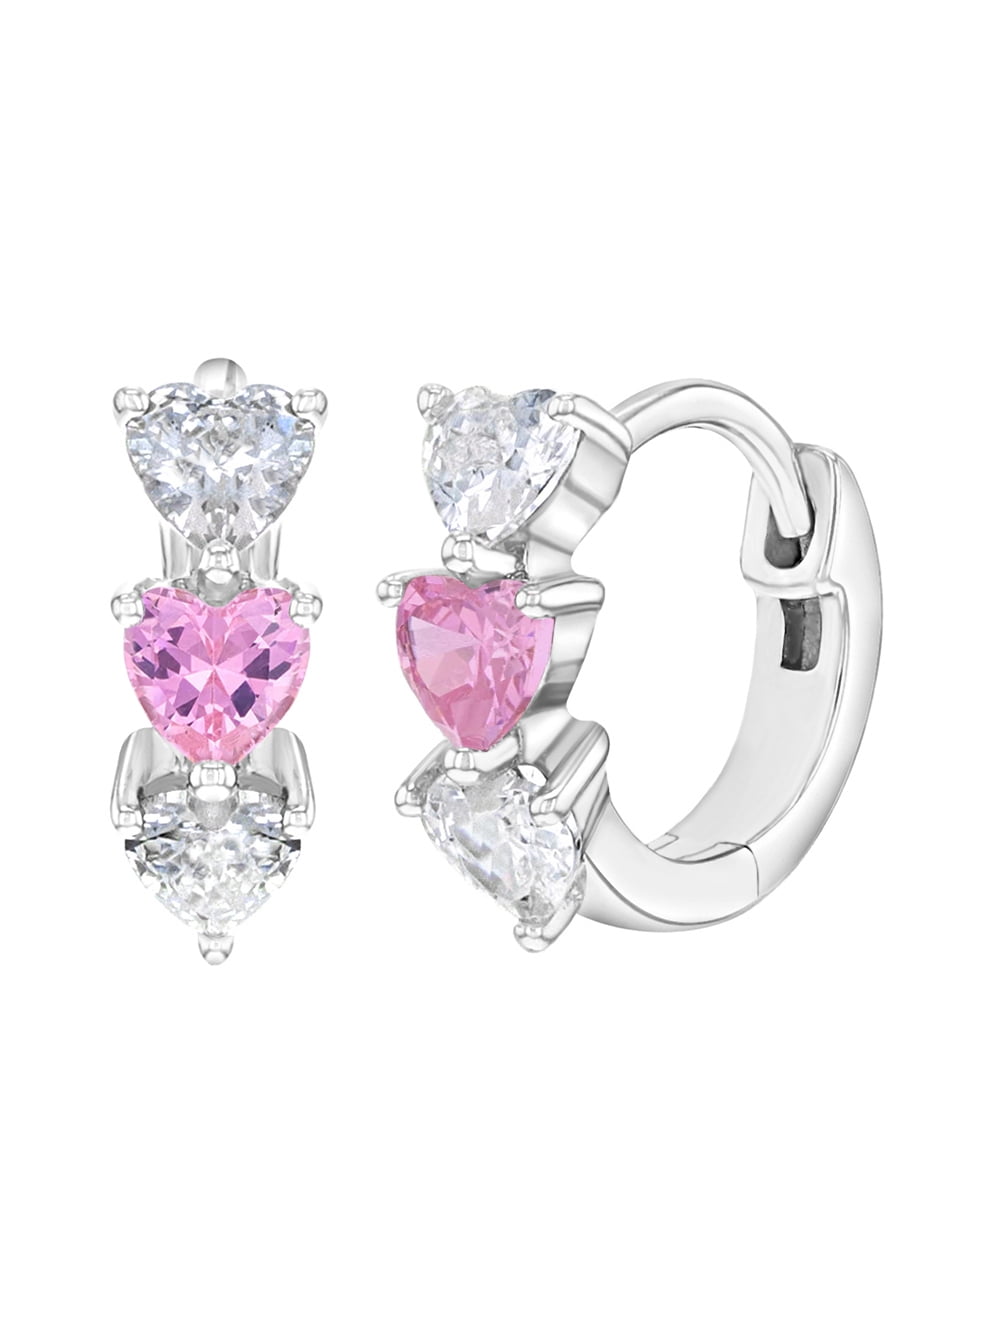 Details about   Sterling Silver Simulated Birthstone Cz Flower Huggie Earrings for Children Girl 